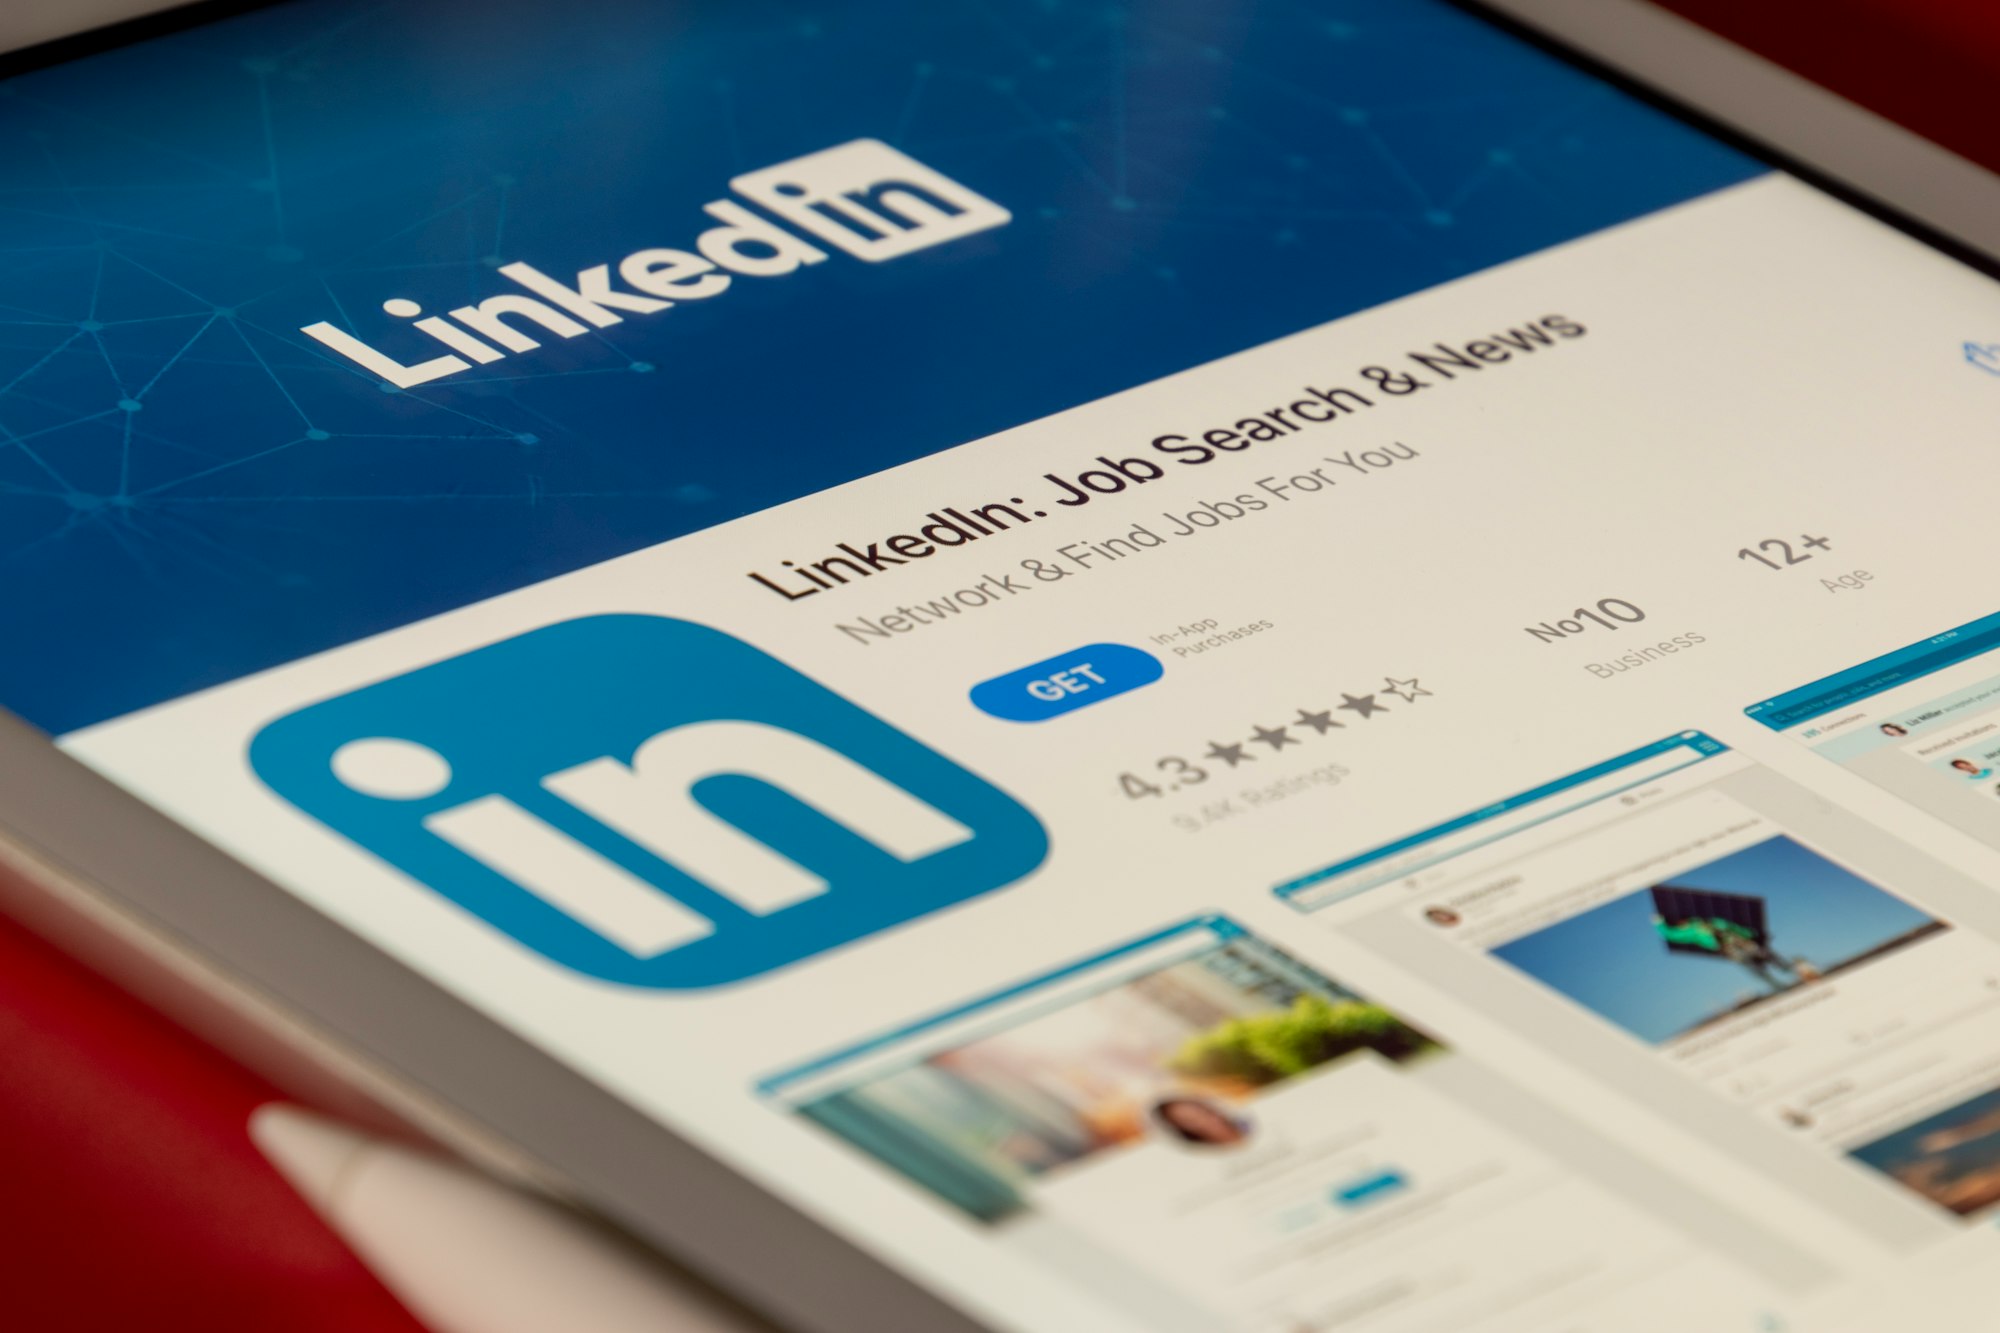 LinkedIn’s New “Catch Up” Feature Encourages Users To Connect With Their Network